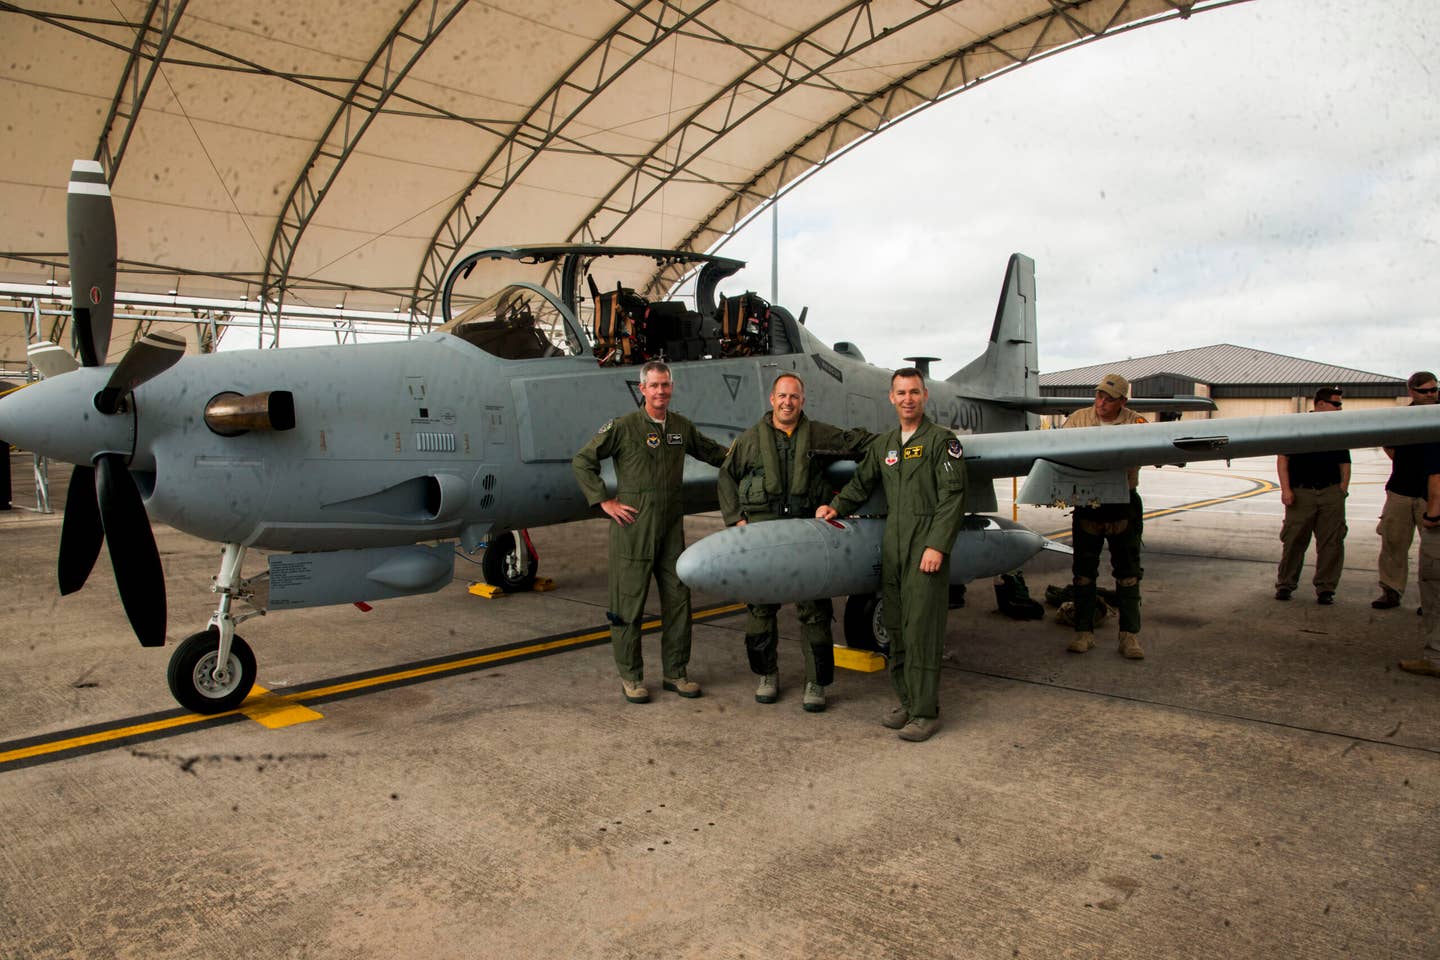 A group photo after the arrival of the first A-29 for the Afghan A-29 Light Air Support training mission at Moody Air Force Base, Georgia, in September 2014. <em>U.S. Air Force photo/Airman 1st Class Dillian Bamman</em>